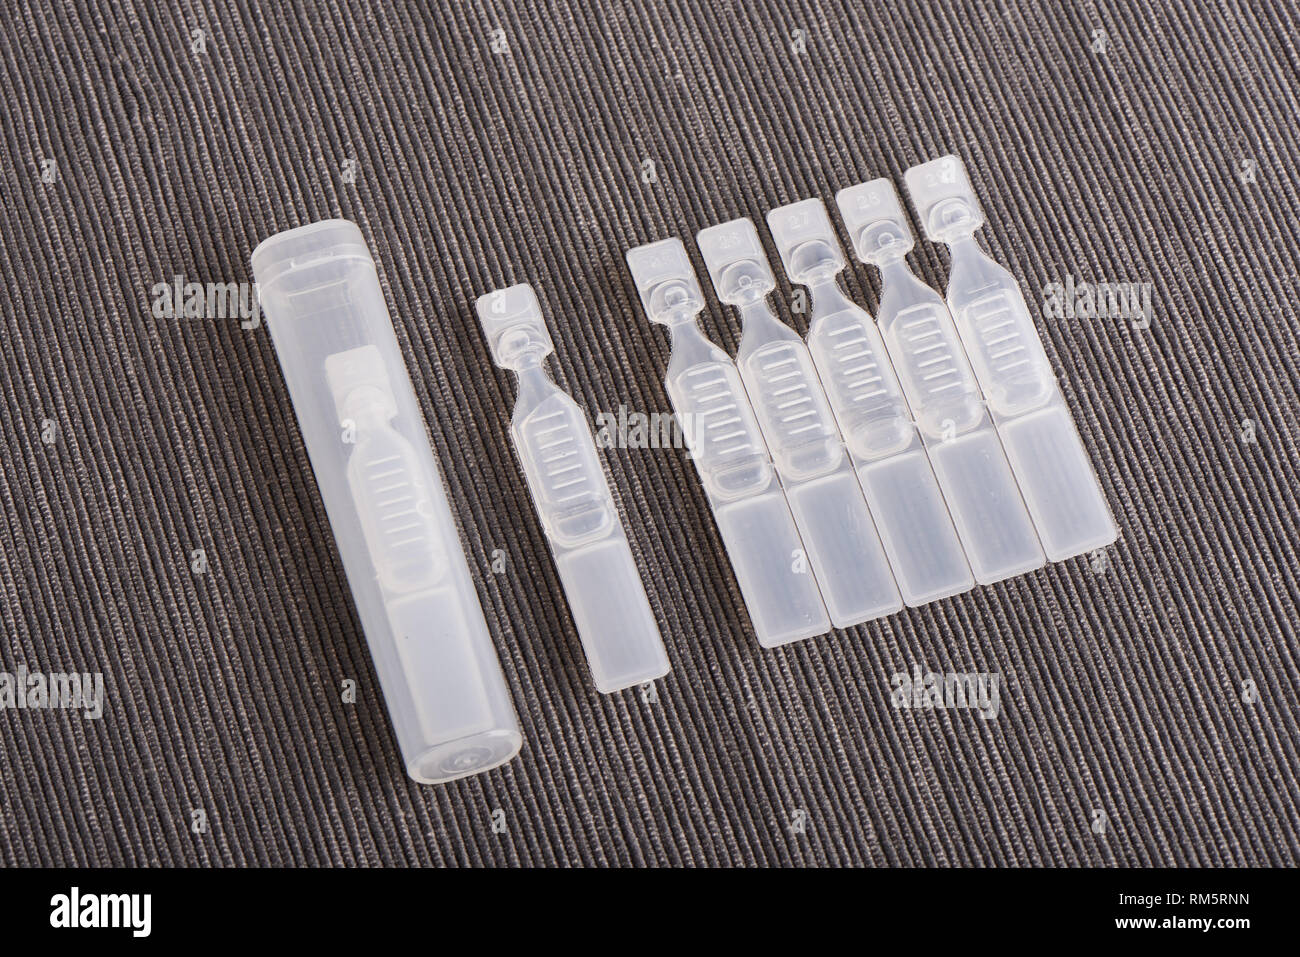 single use artificial tear lubricant eye drops containers with case Stock Photo